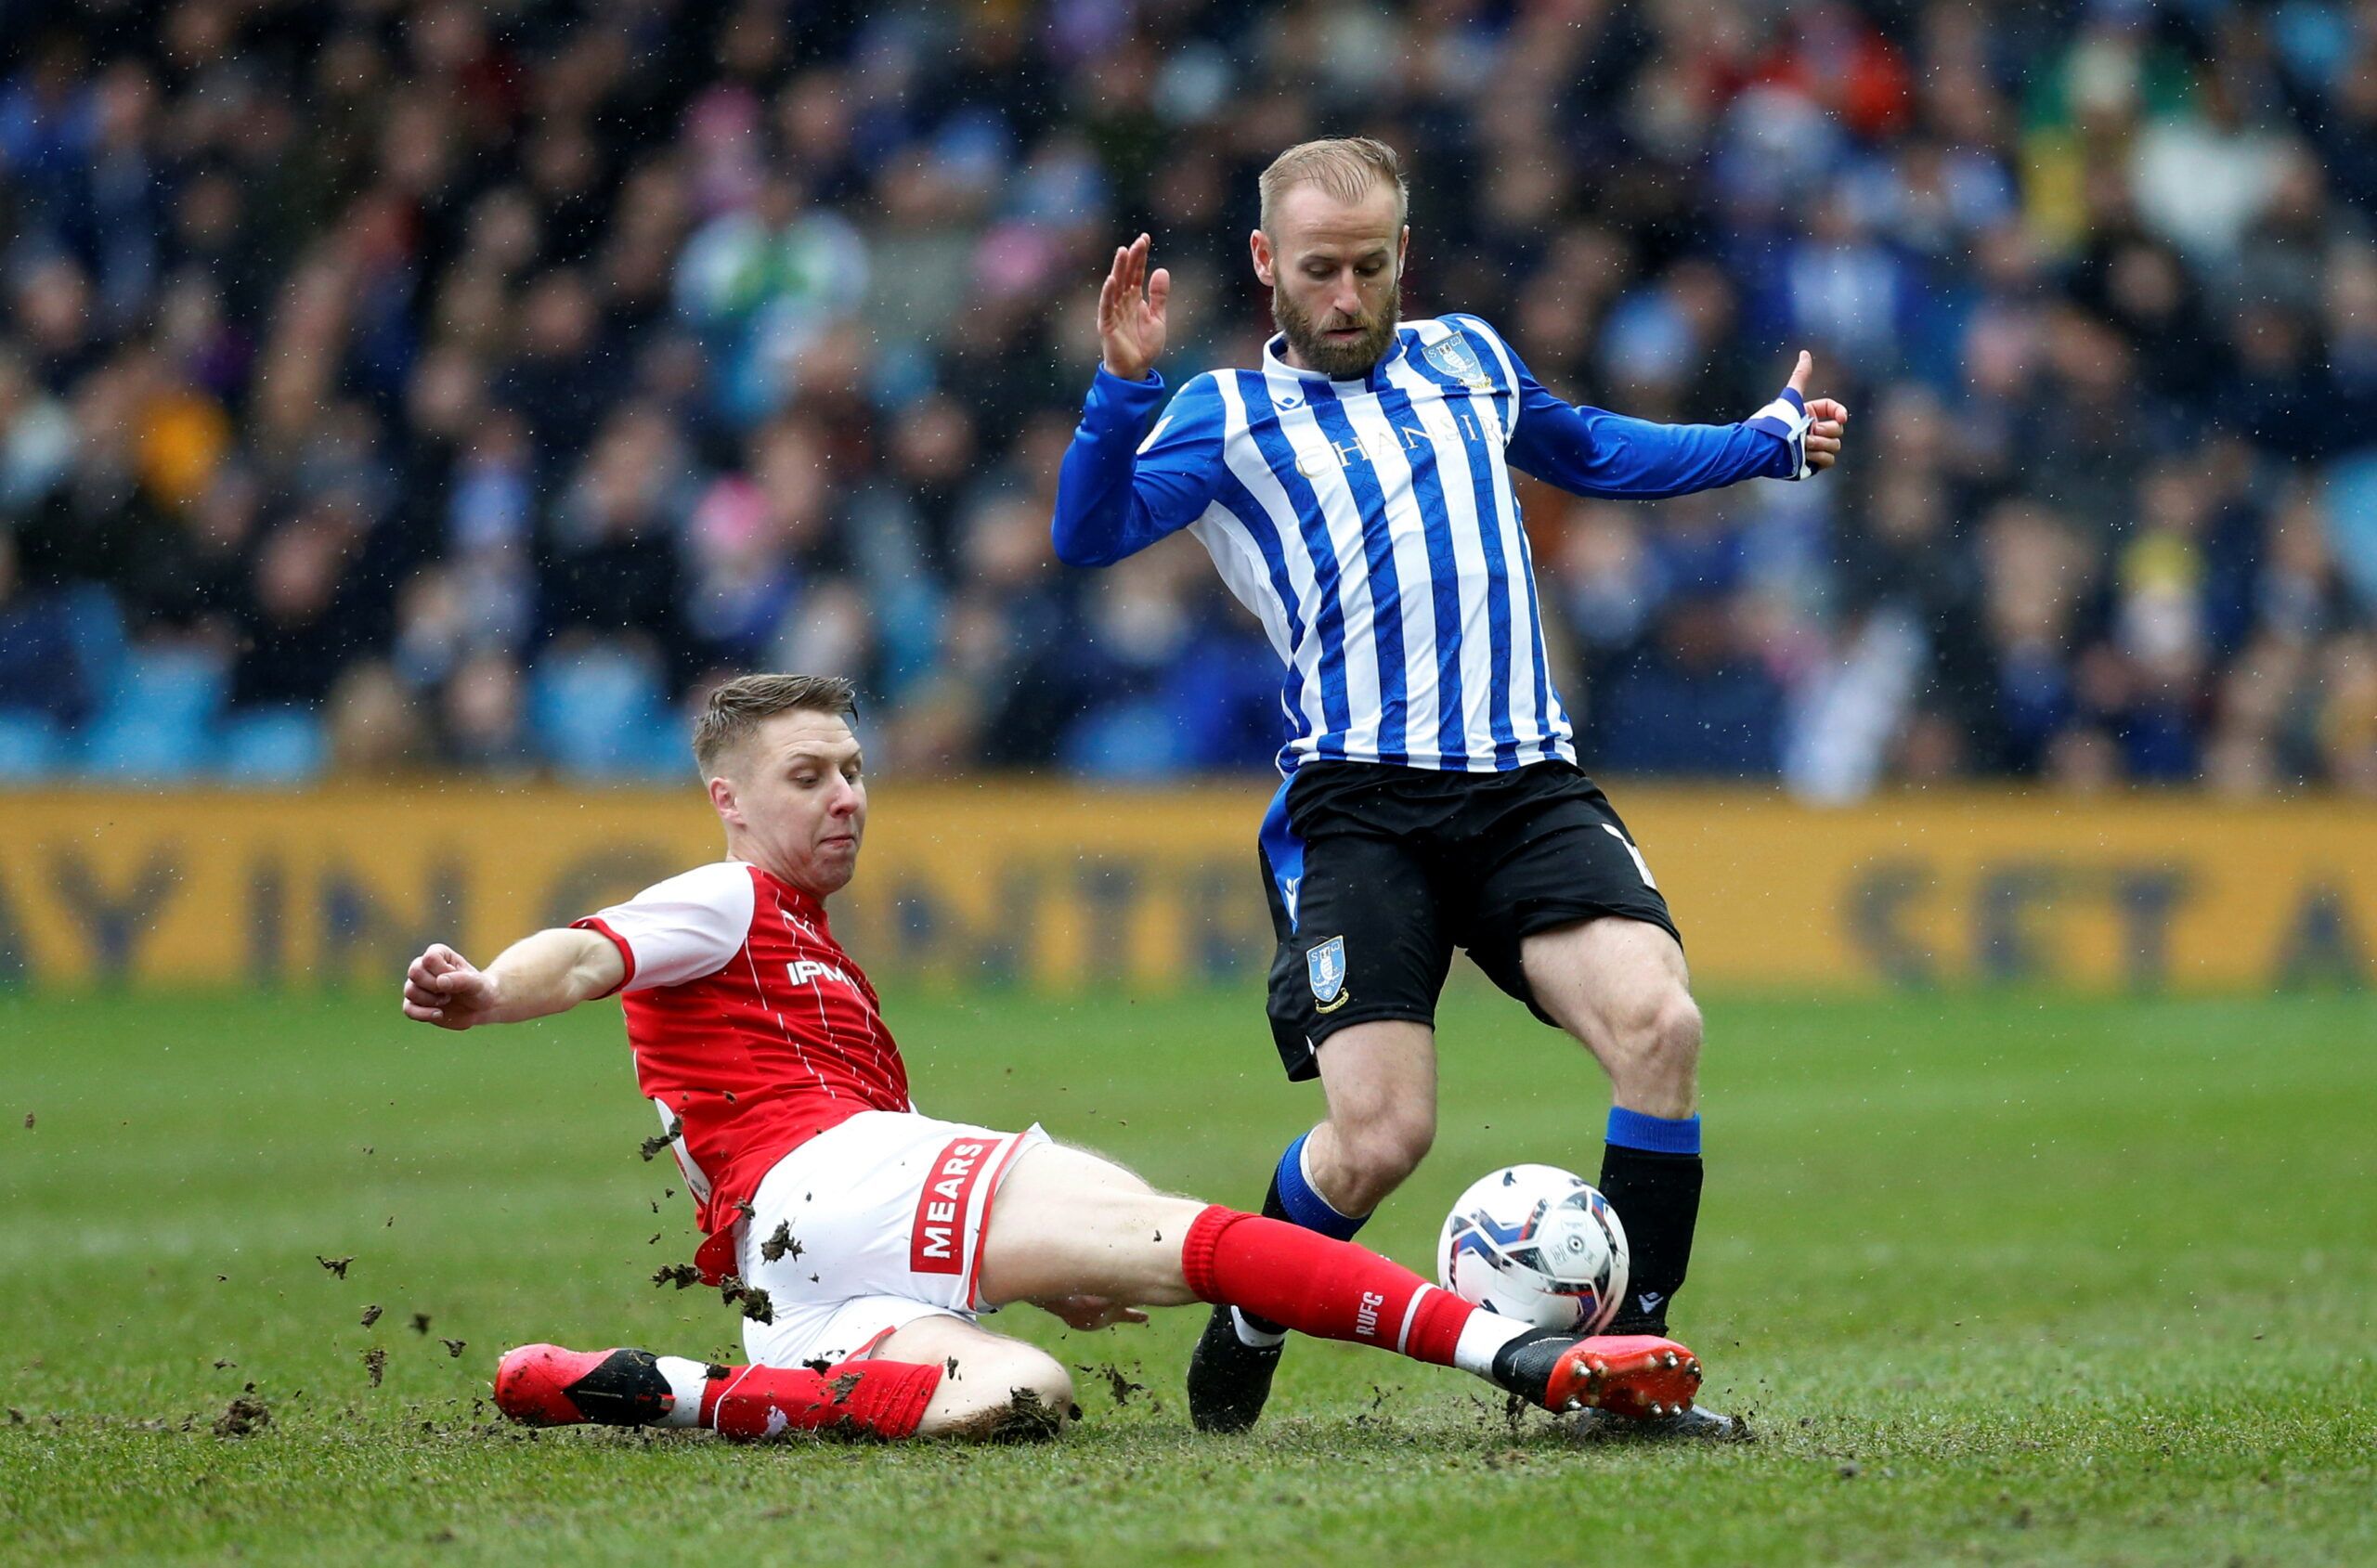 Soccer Football - League One - Sheffield Wednesday v Rotherham United - Hillsborough Stadium, Sheffield, Britain - February 13, 2022  Rotherham United's Jamie Lindsay in action with Sheffield Wednesday's Barry Bannan  Action Images/Ed Sykes  EDITORIAL USE ONLY. No use with unauthorized audio, video, data, fixture lists, club/league logos or 